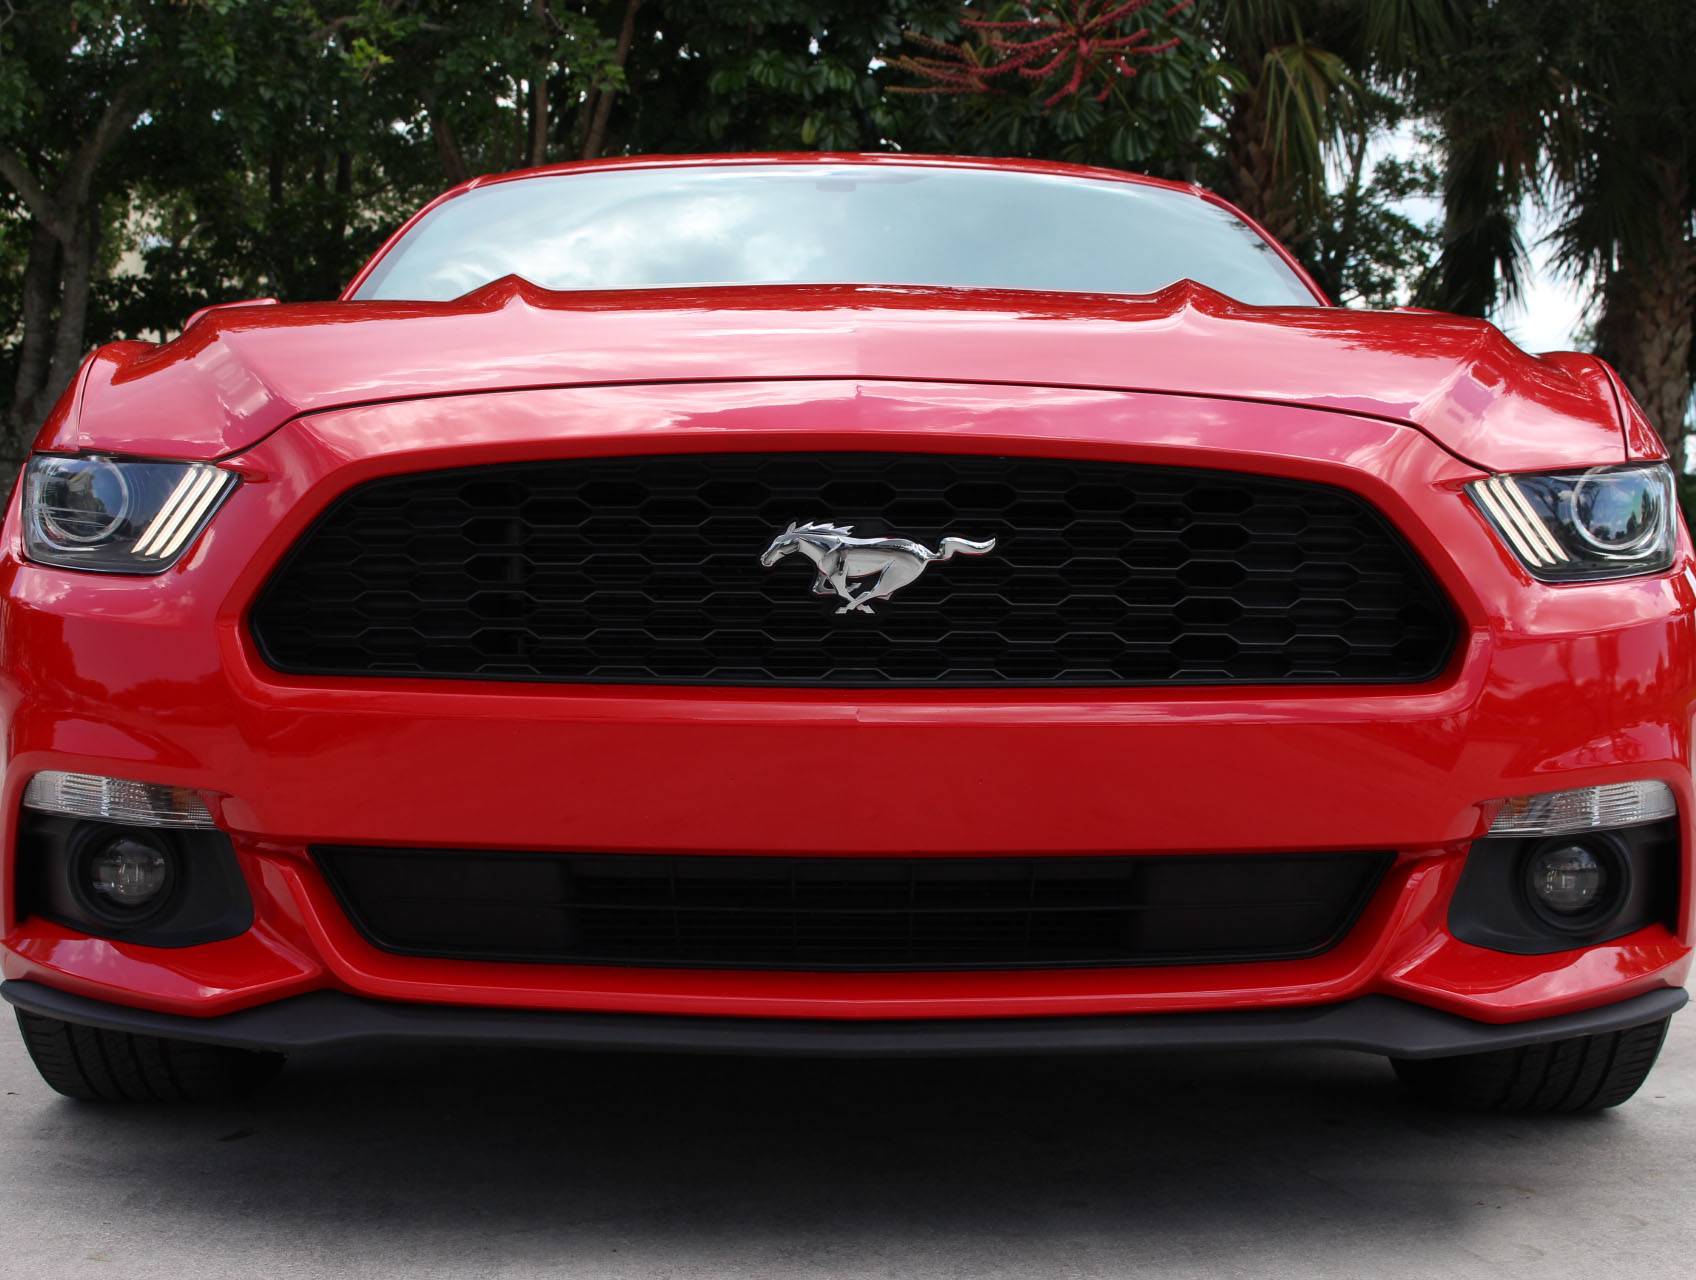 Florida Fine Cars - Used FORD MUSTANG 2015 MARGATE V6